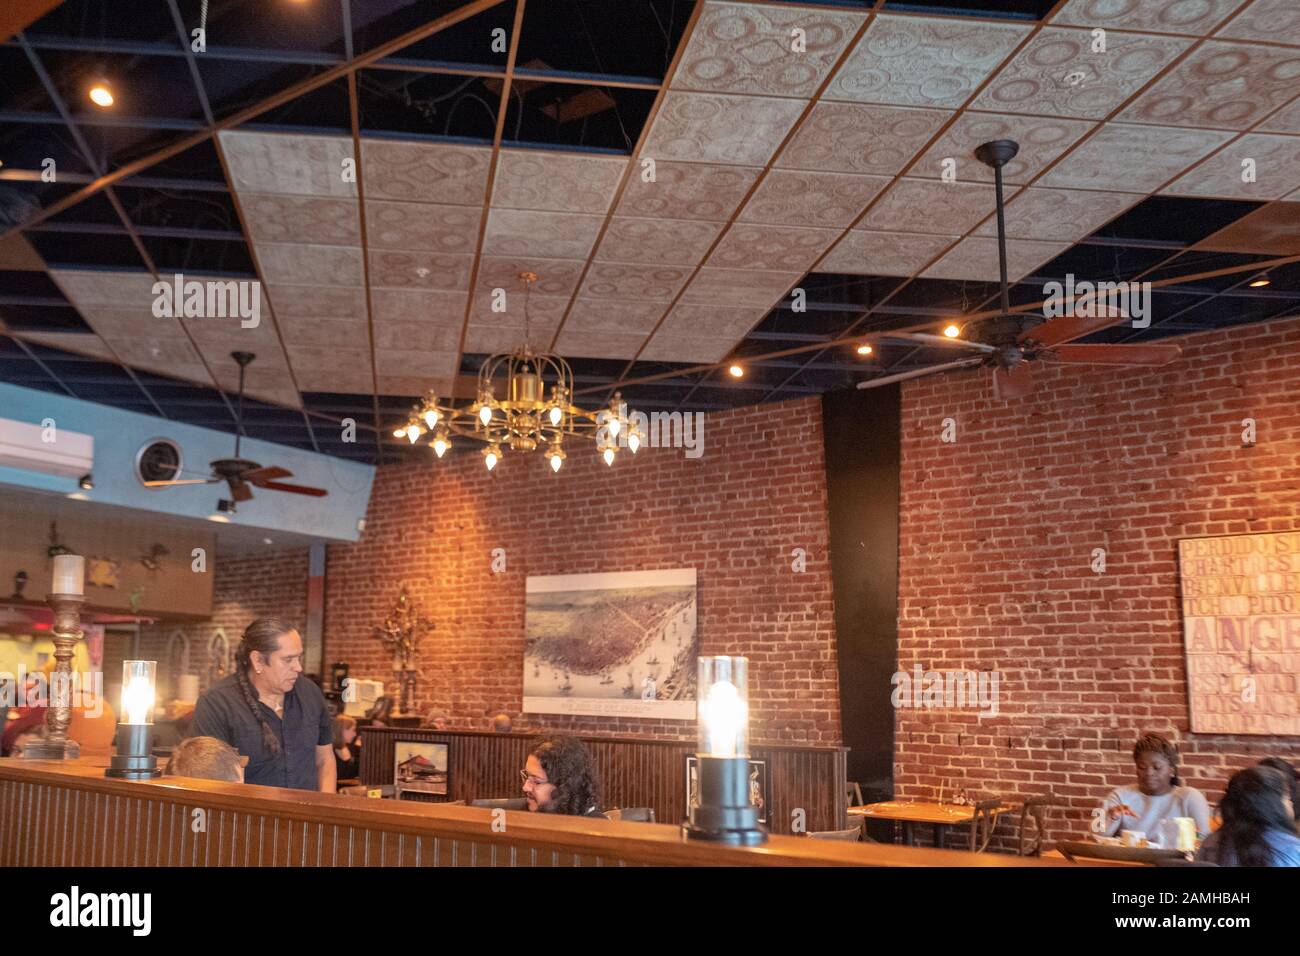 Interior view of decor at Angeline's Louisiana Kitchen, a cajun restaurant in the North Shattuck neighborhood of Berkeley, California, November 30, 2019. Formerly known as the Gourmet Ghetto, the North Shattuck neighborhood is known as the birthplace of the New American food movement. () Stock Photo